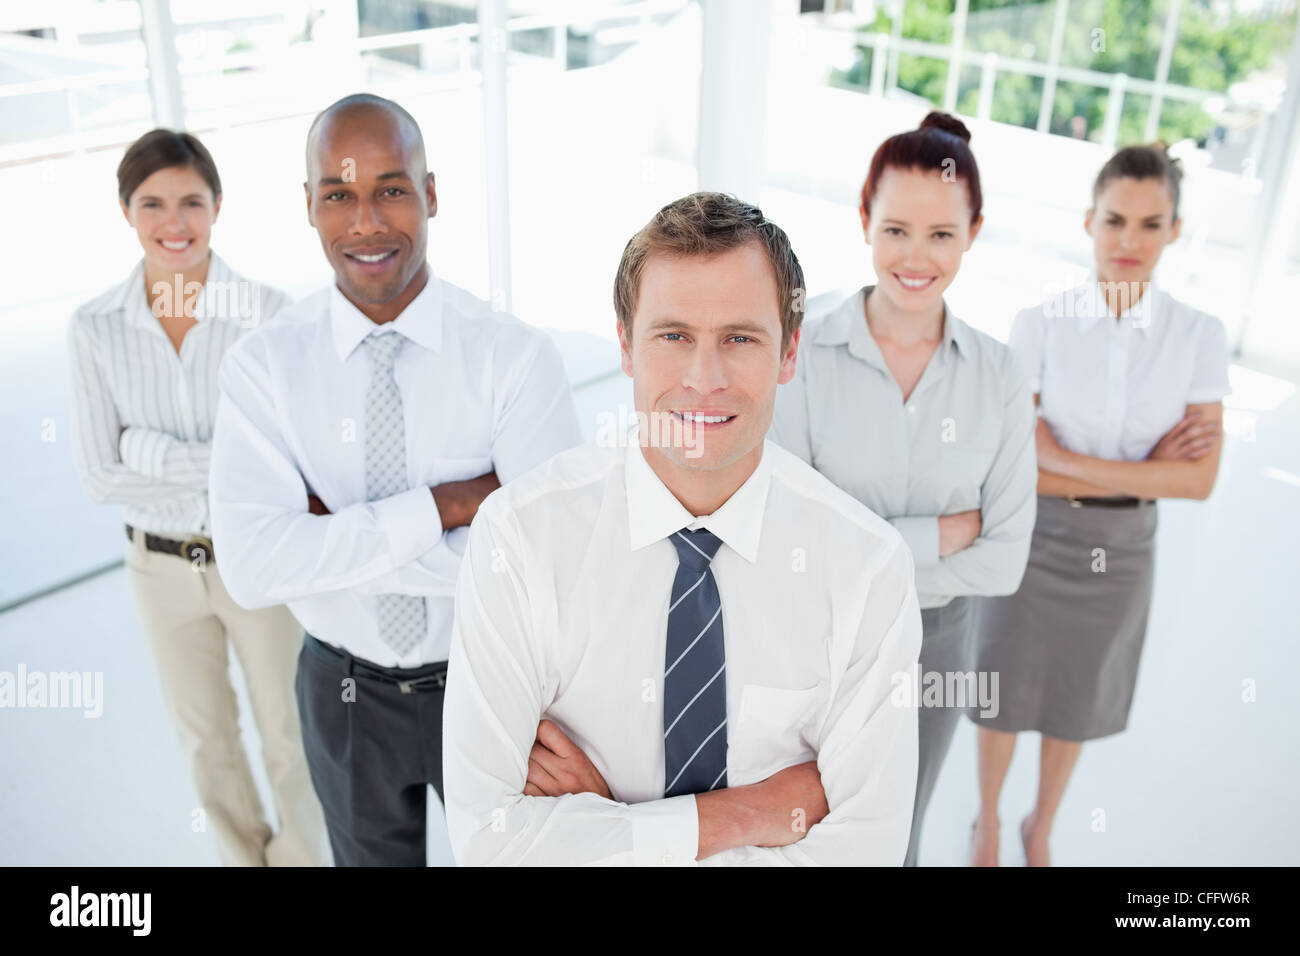 Salesteam with arms crossed standing together Stock Photo